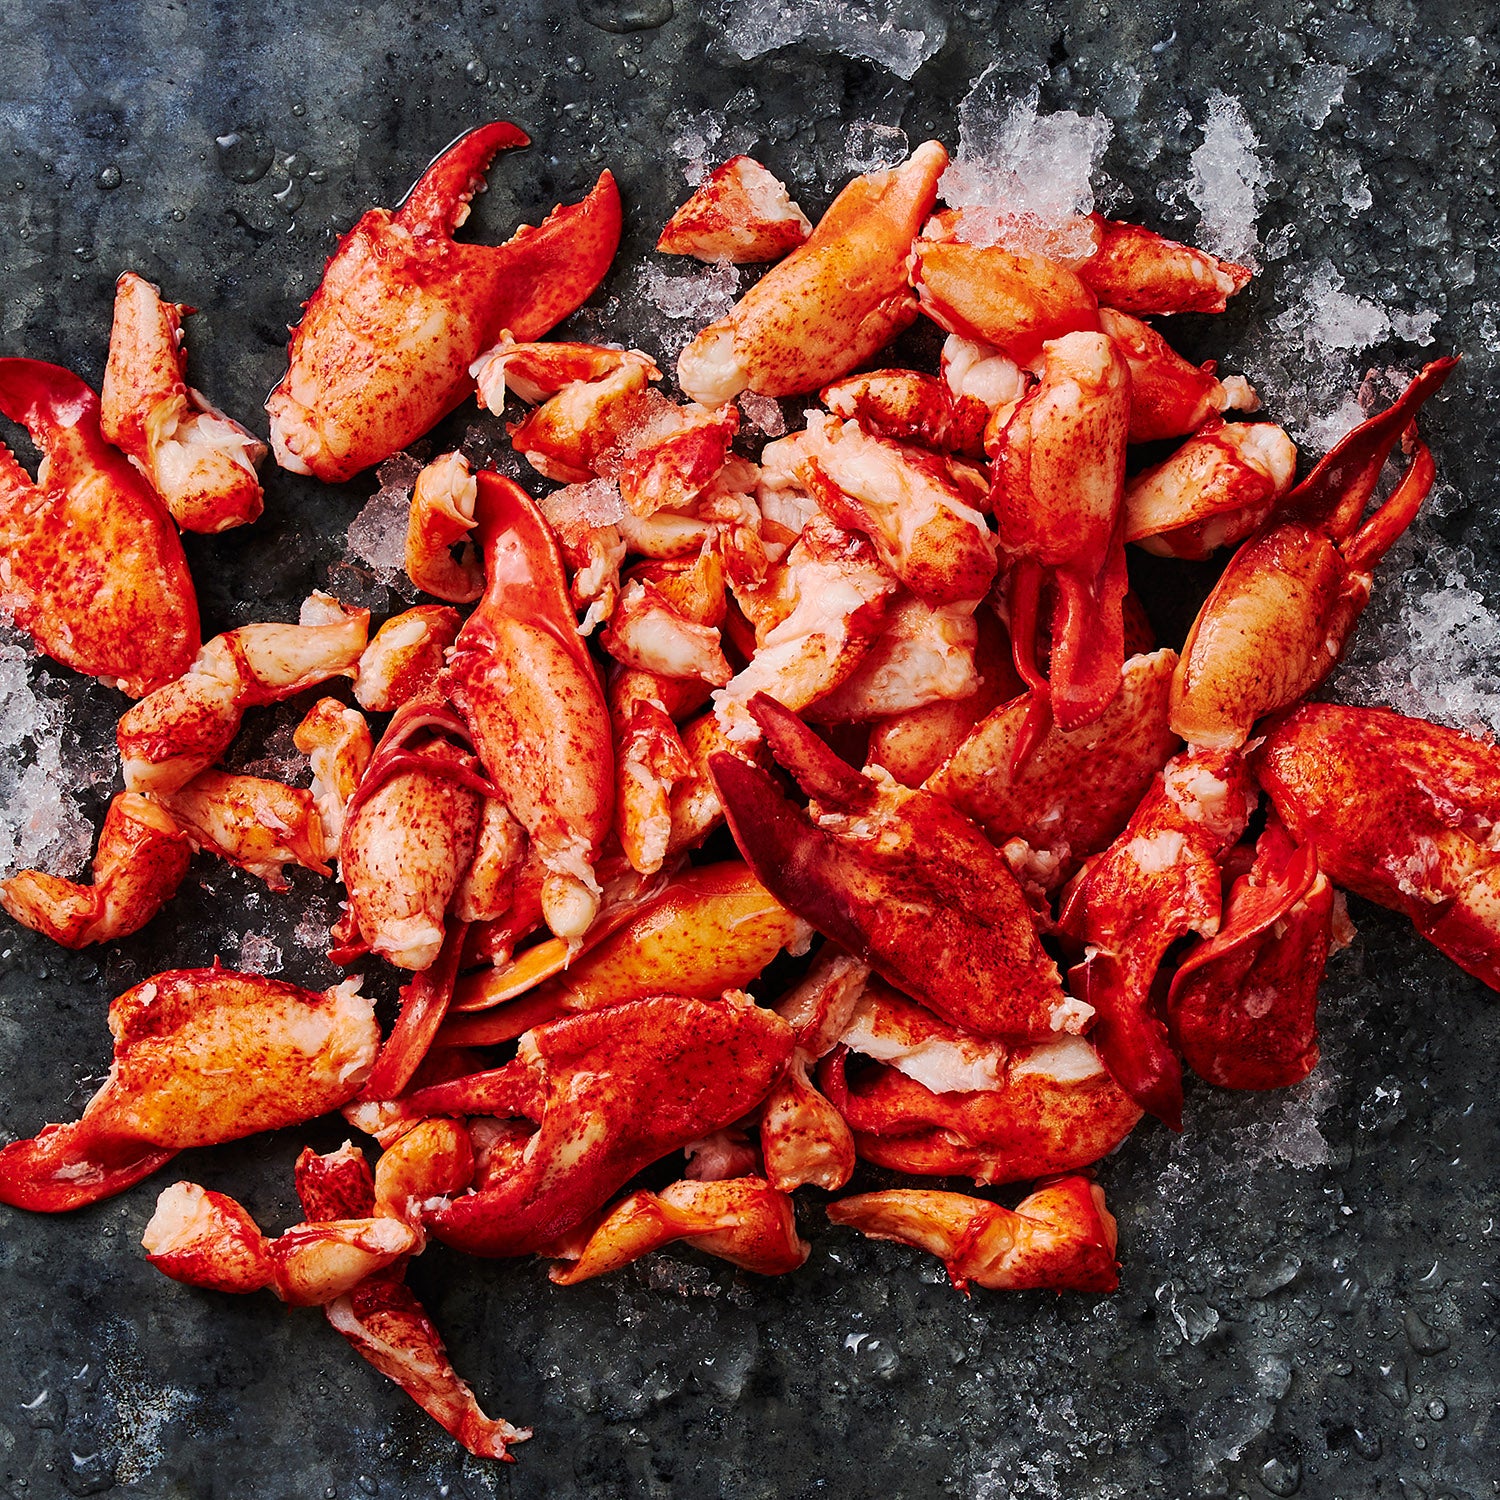 This photograph shows a pile of Beautiful Maine lobster Meat on top a bed of ice